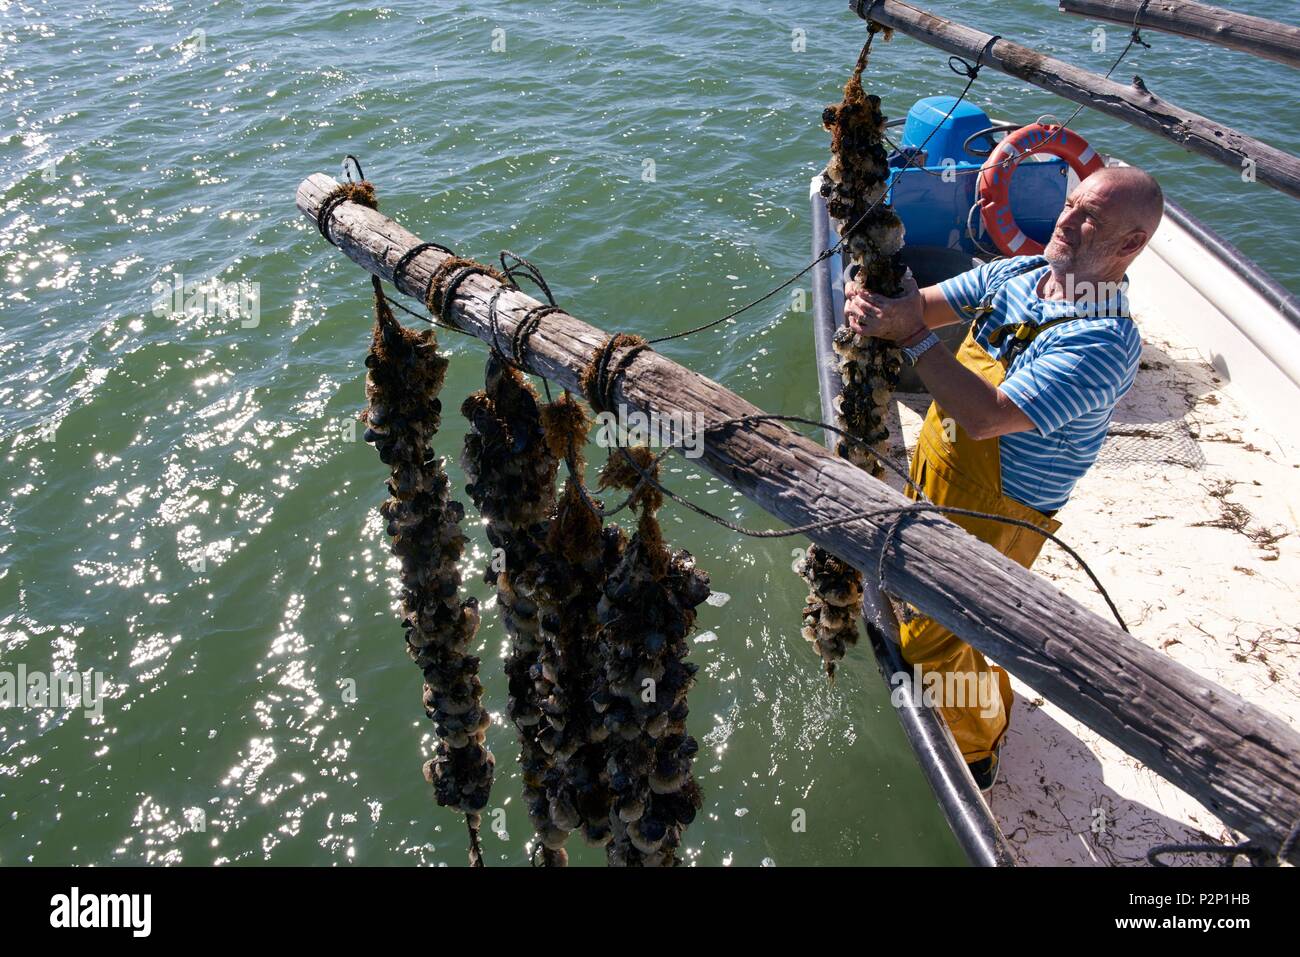 France, Aude, Leucate, Leucate pond, Christophe Guinot company, fisherman and oyster farmer, mussel farming Stock Photo